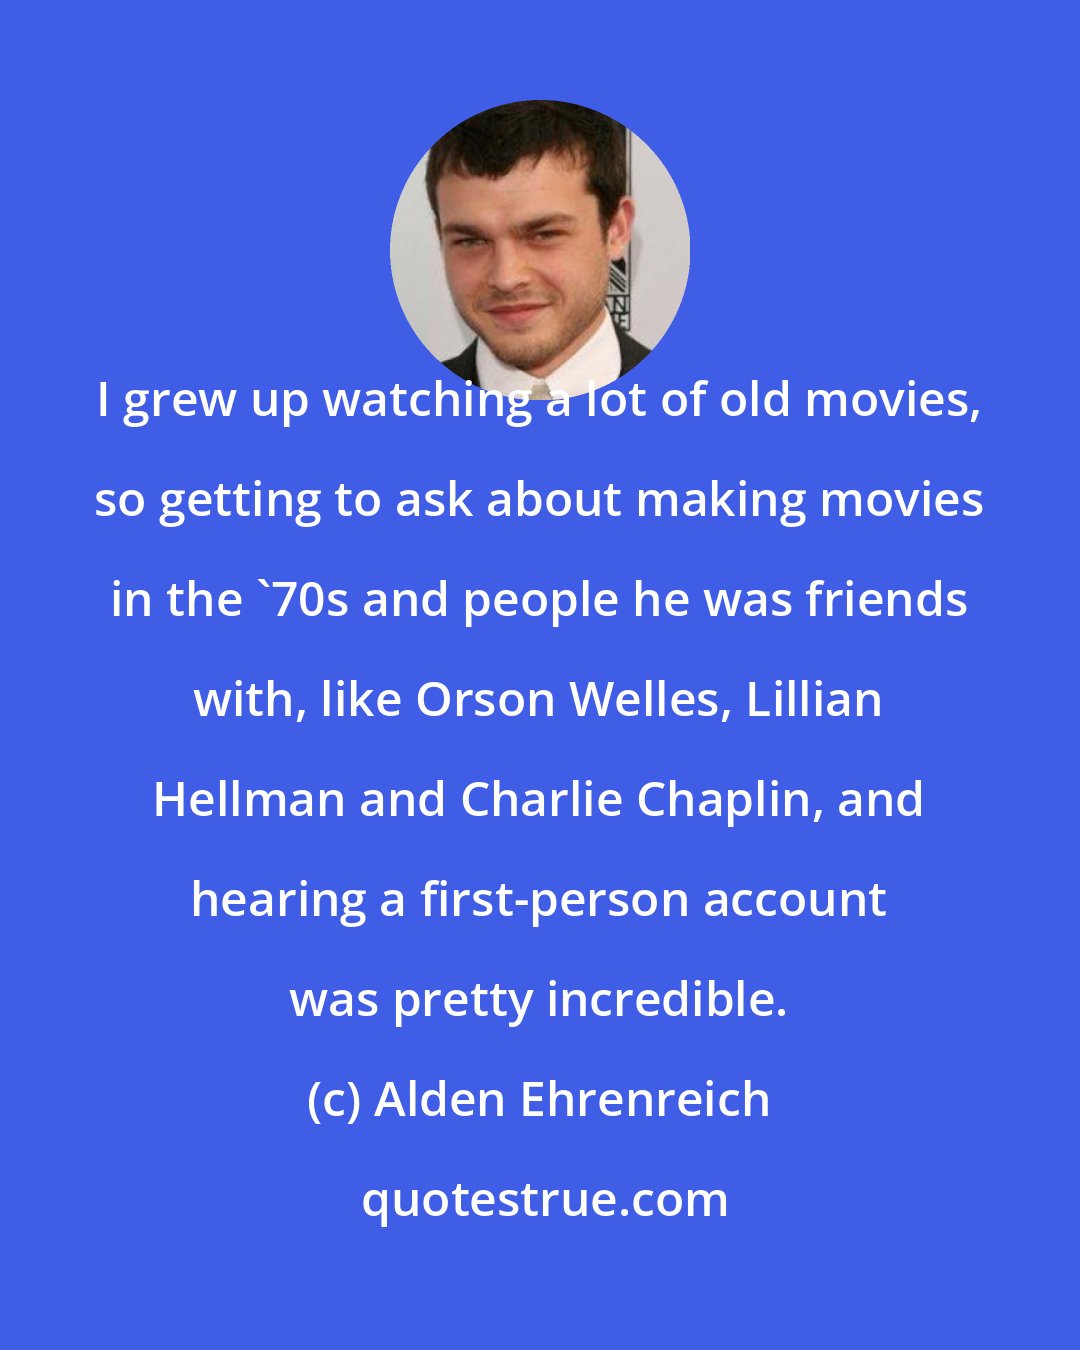 Alden Ehrenreich: I grew up watching a lot of old movies, so getting to ask about making movies in the '70s and people he was friends with, like Orson Welles, Lillian Hellman and Charlie Chaplin, and hearing a first-person account was pretty incredible.